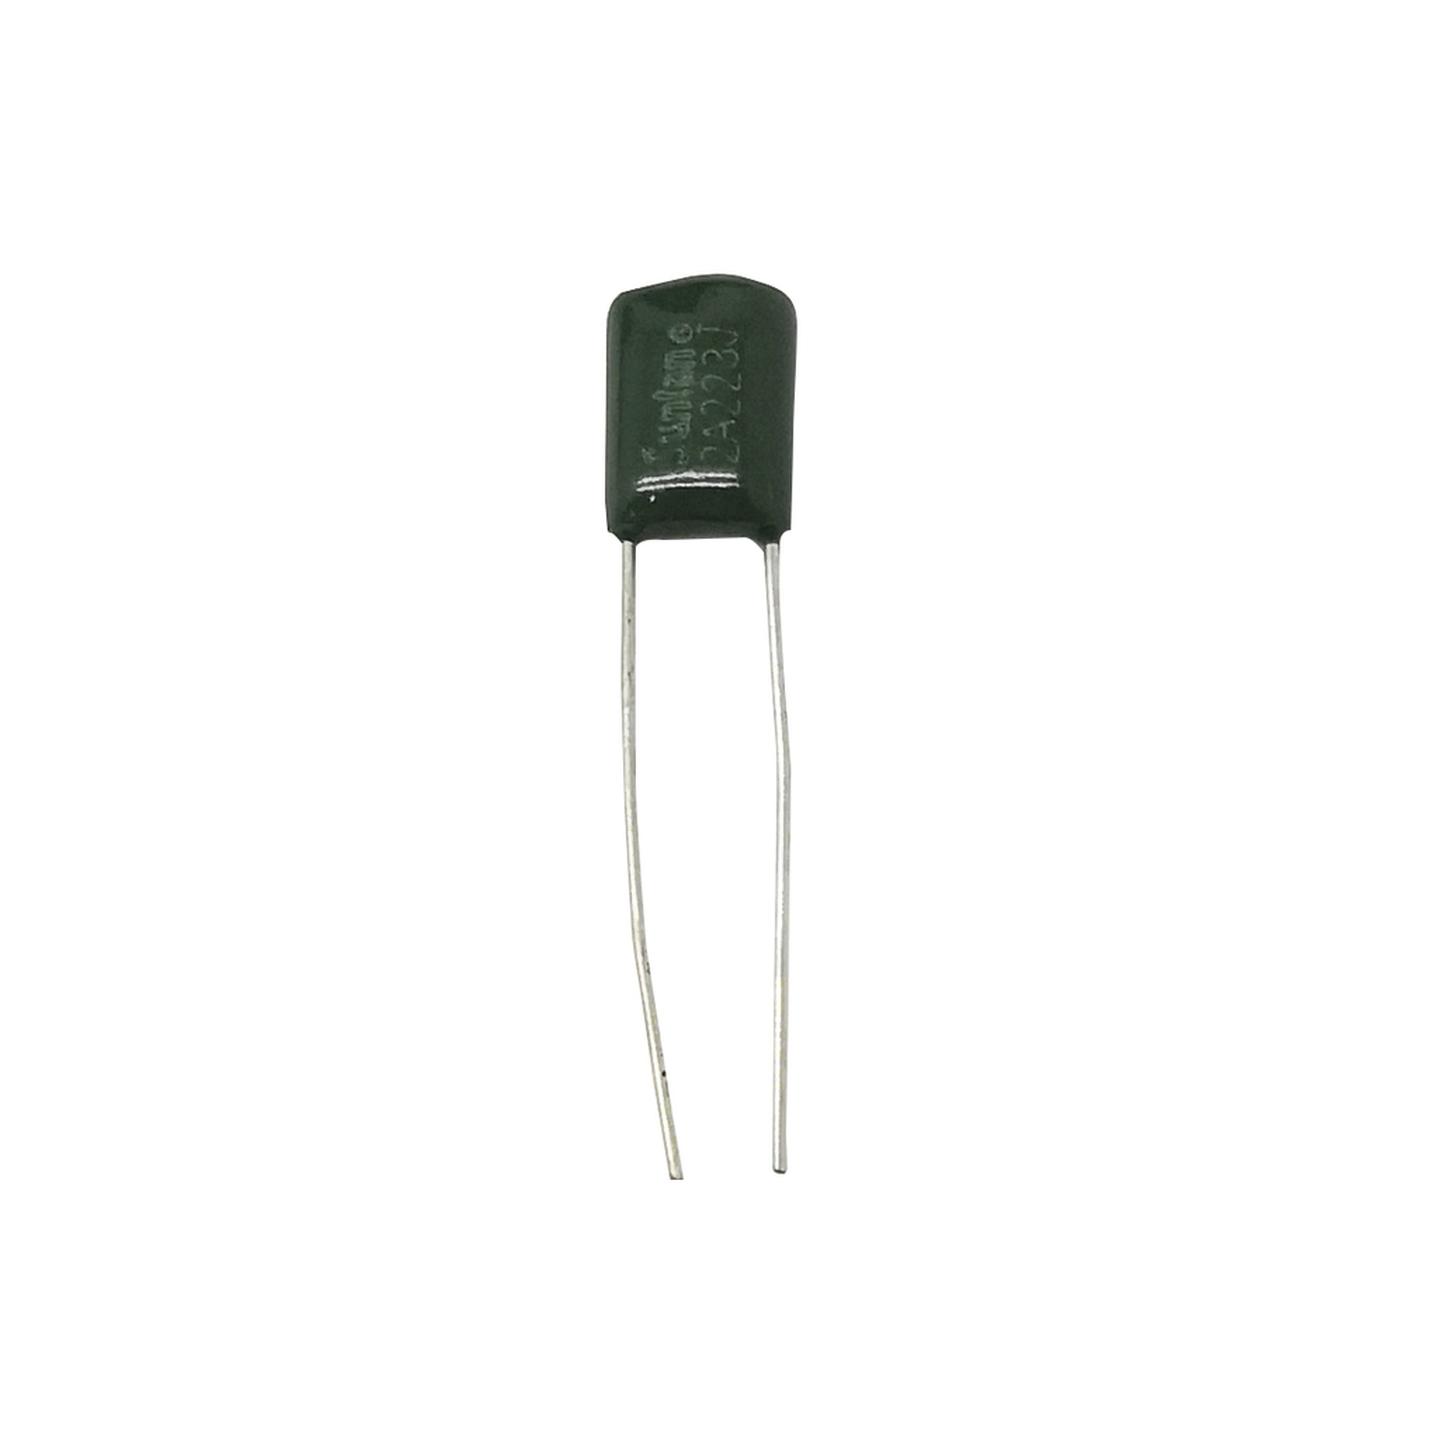 22nF 100VDC Polyester Capacitor